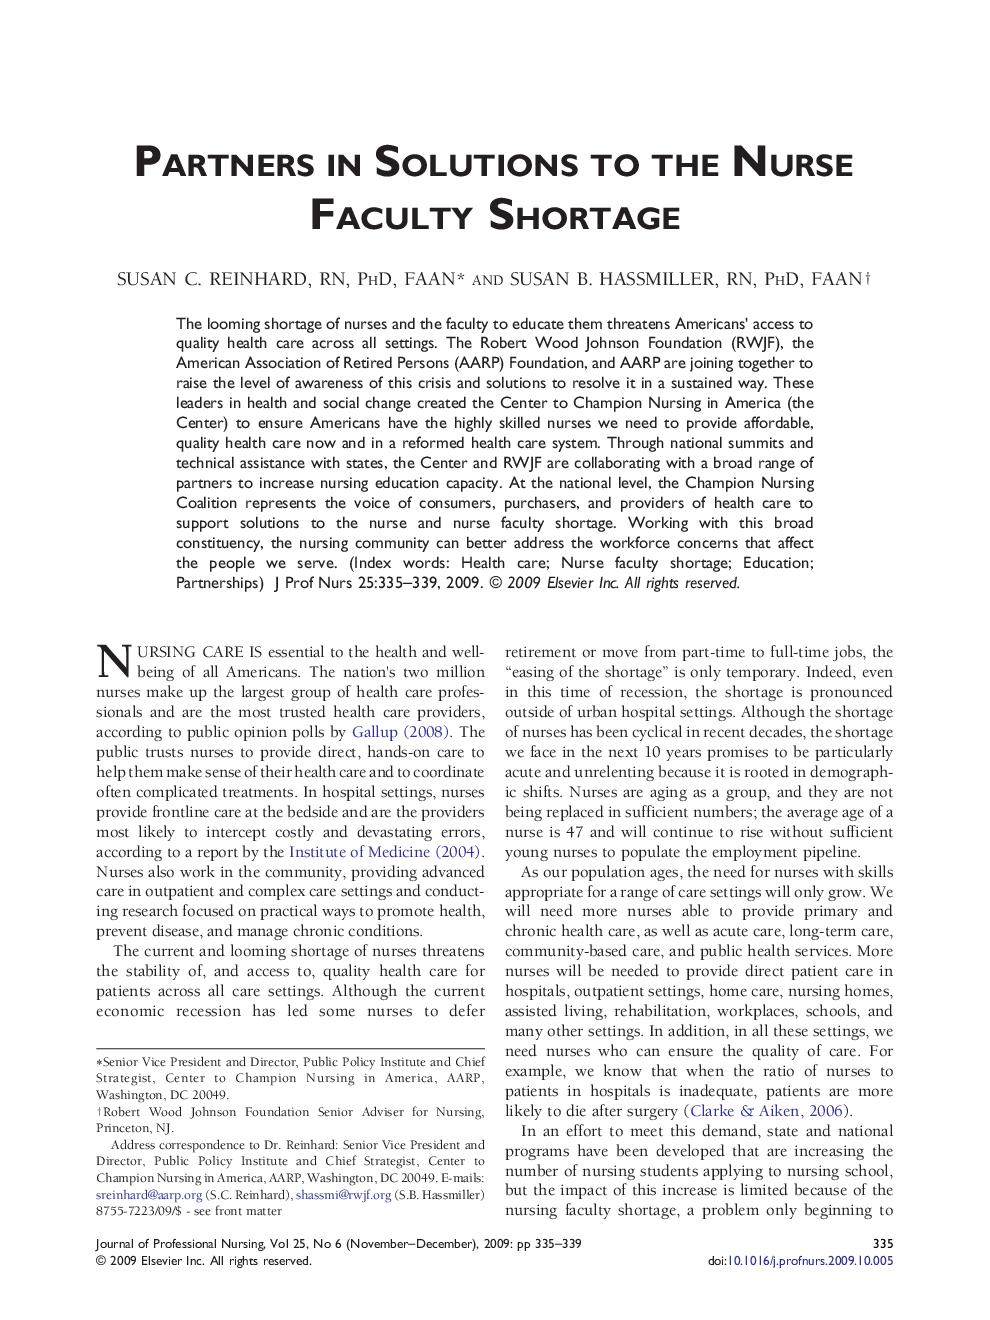 Partners in Solutions to the Nurse Faculty Shortage